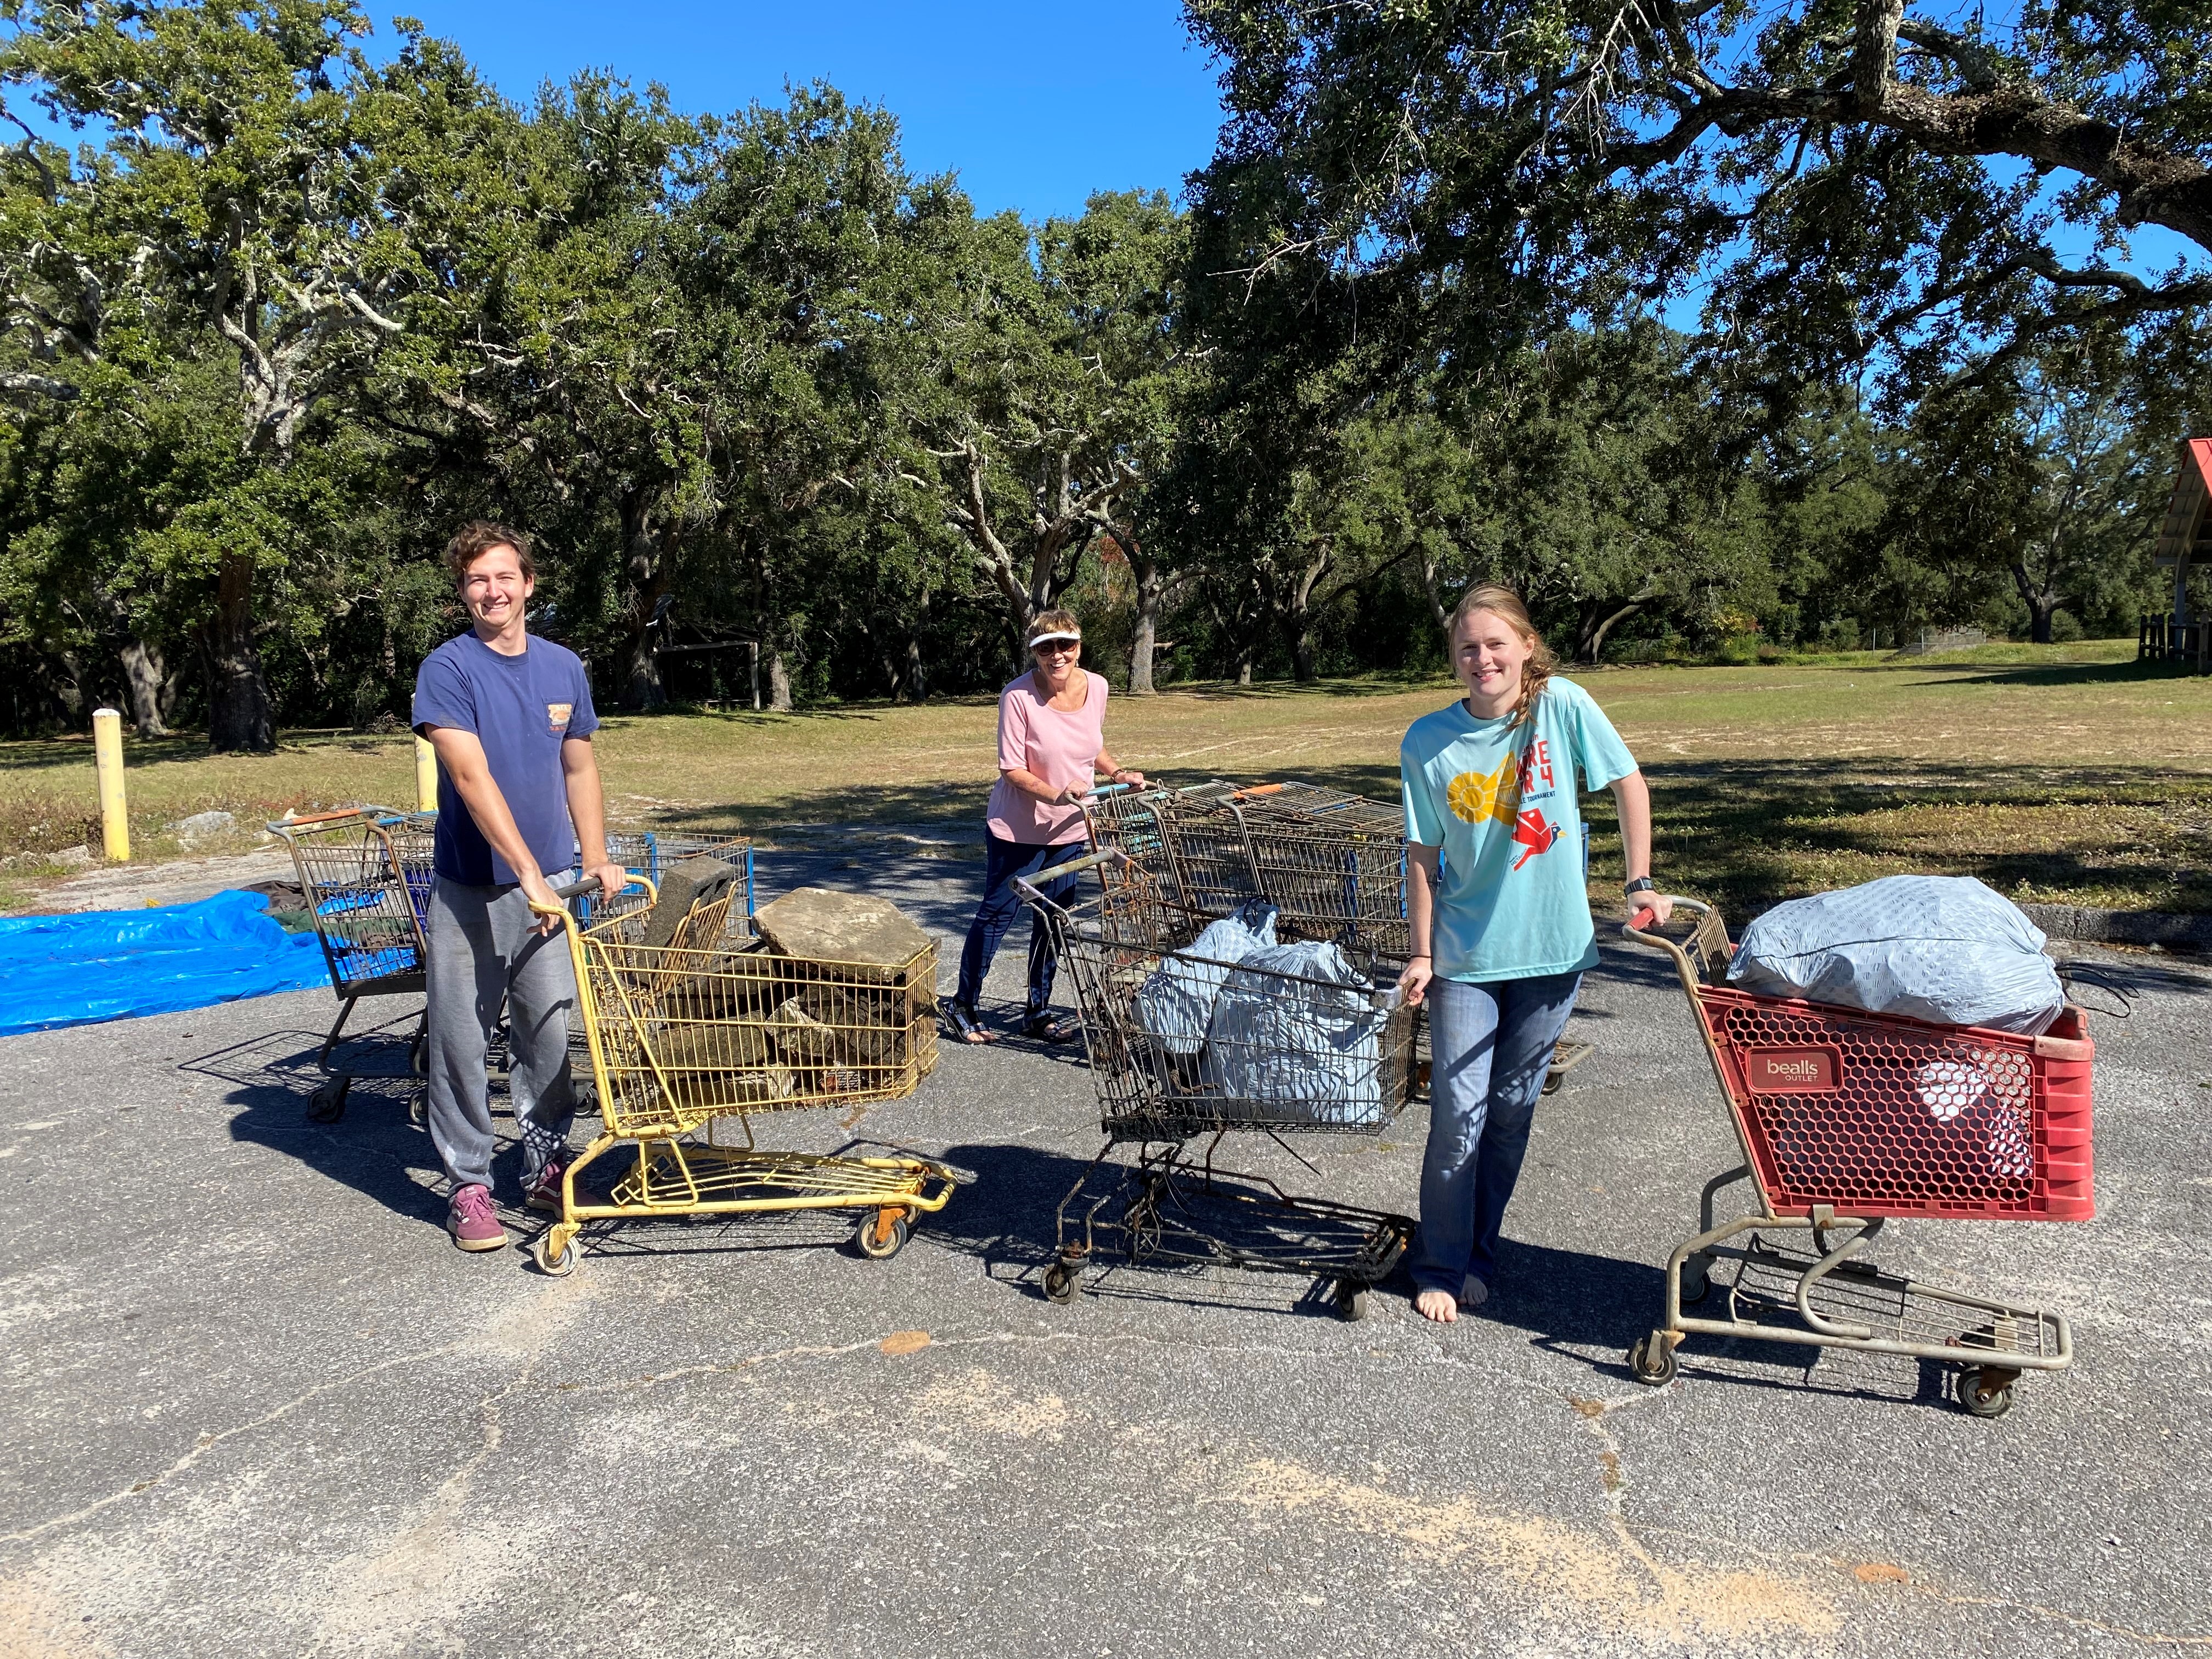 Volunteers with shopping carts removed from the creek